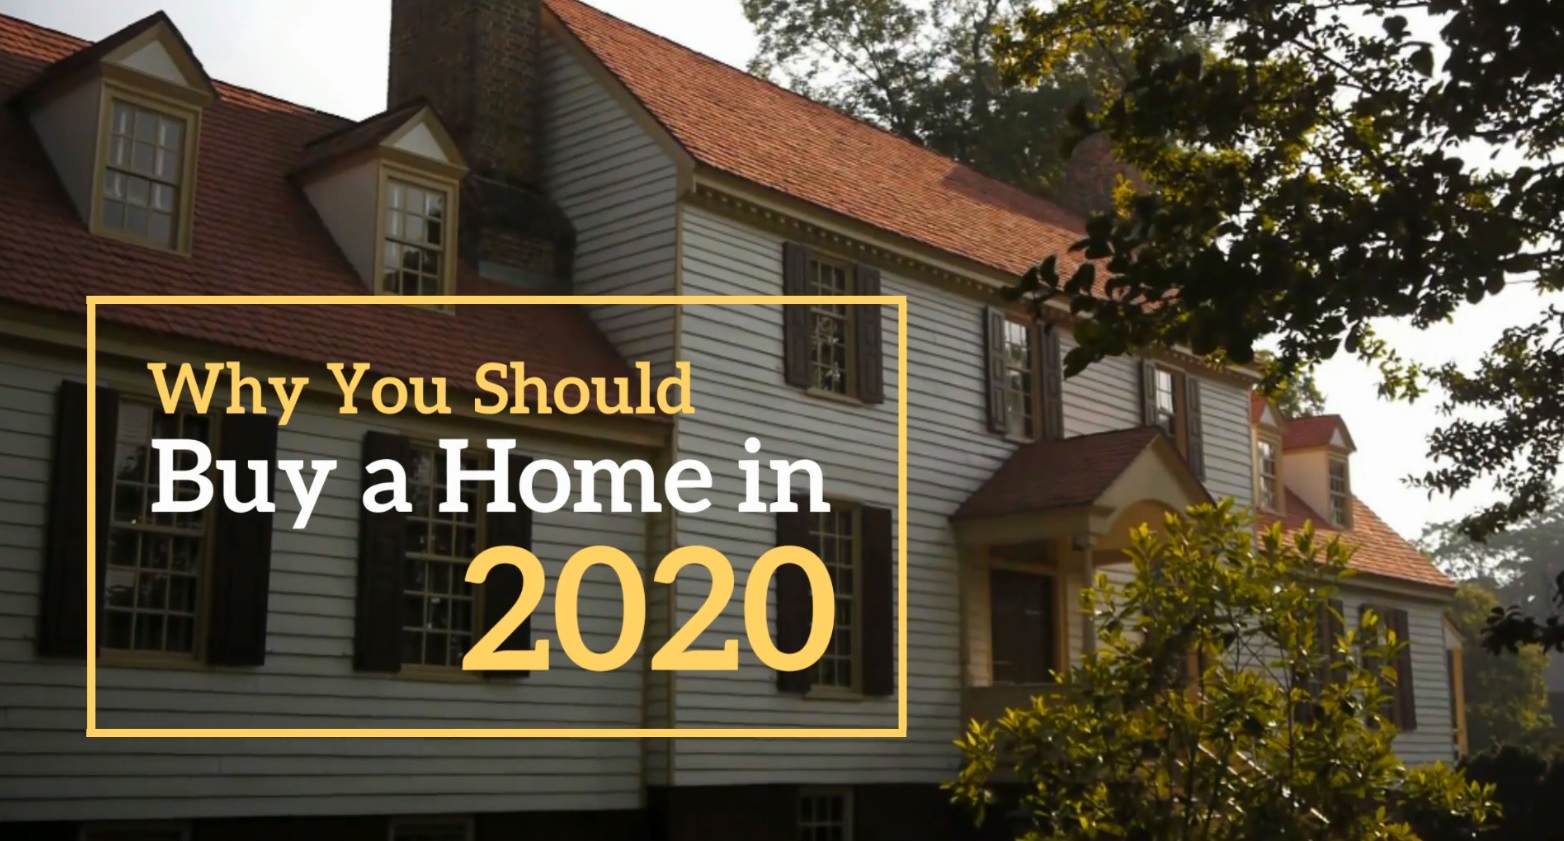 Should You Buy A Home In 2020?